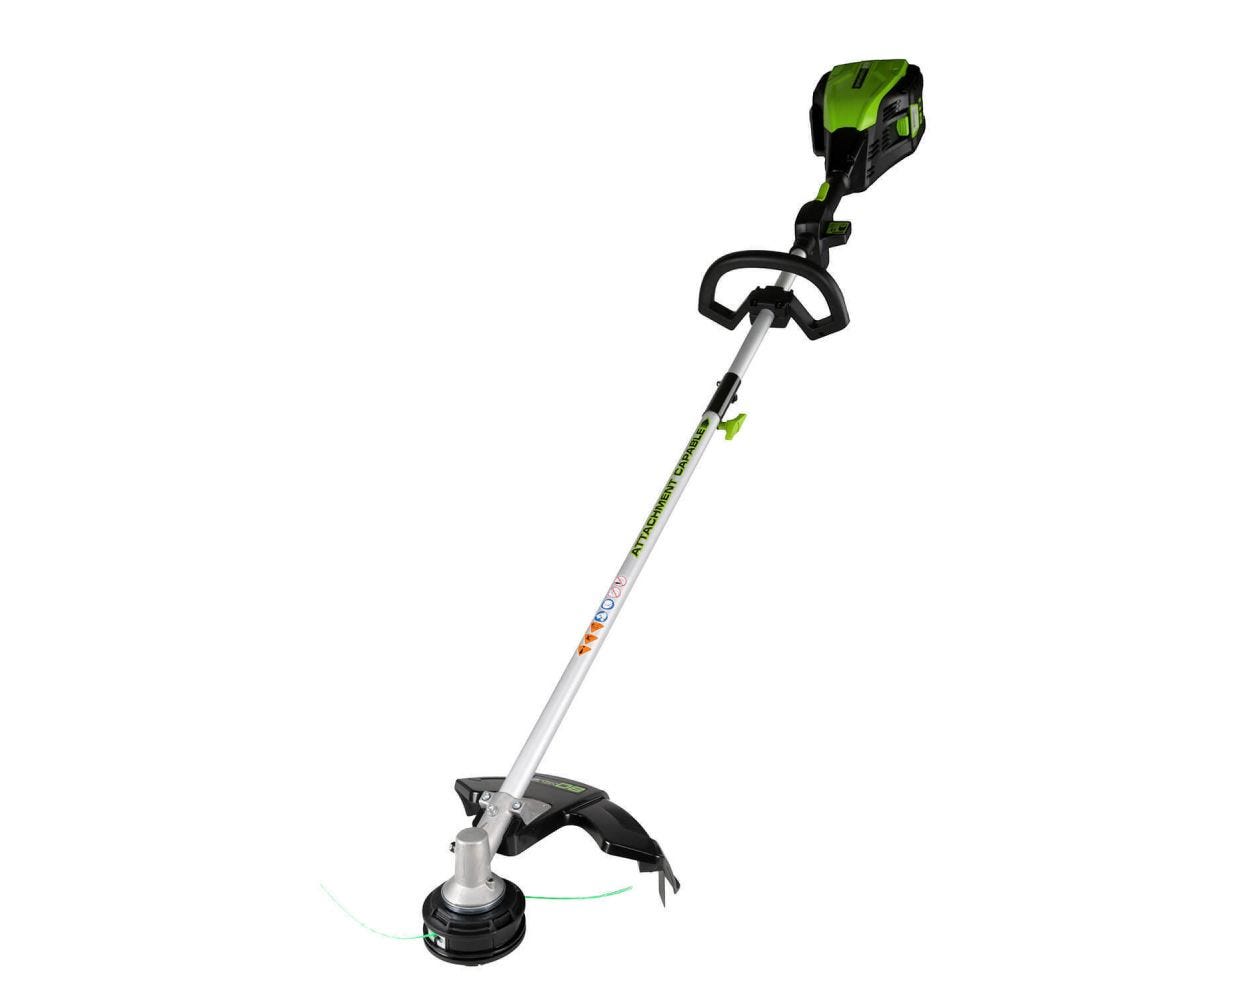 80V Cordless 16 inch Brushless Attachment Capable String Trimmer (Tool Only) | Greenworks Pro